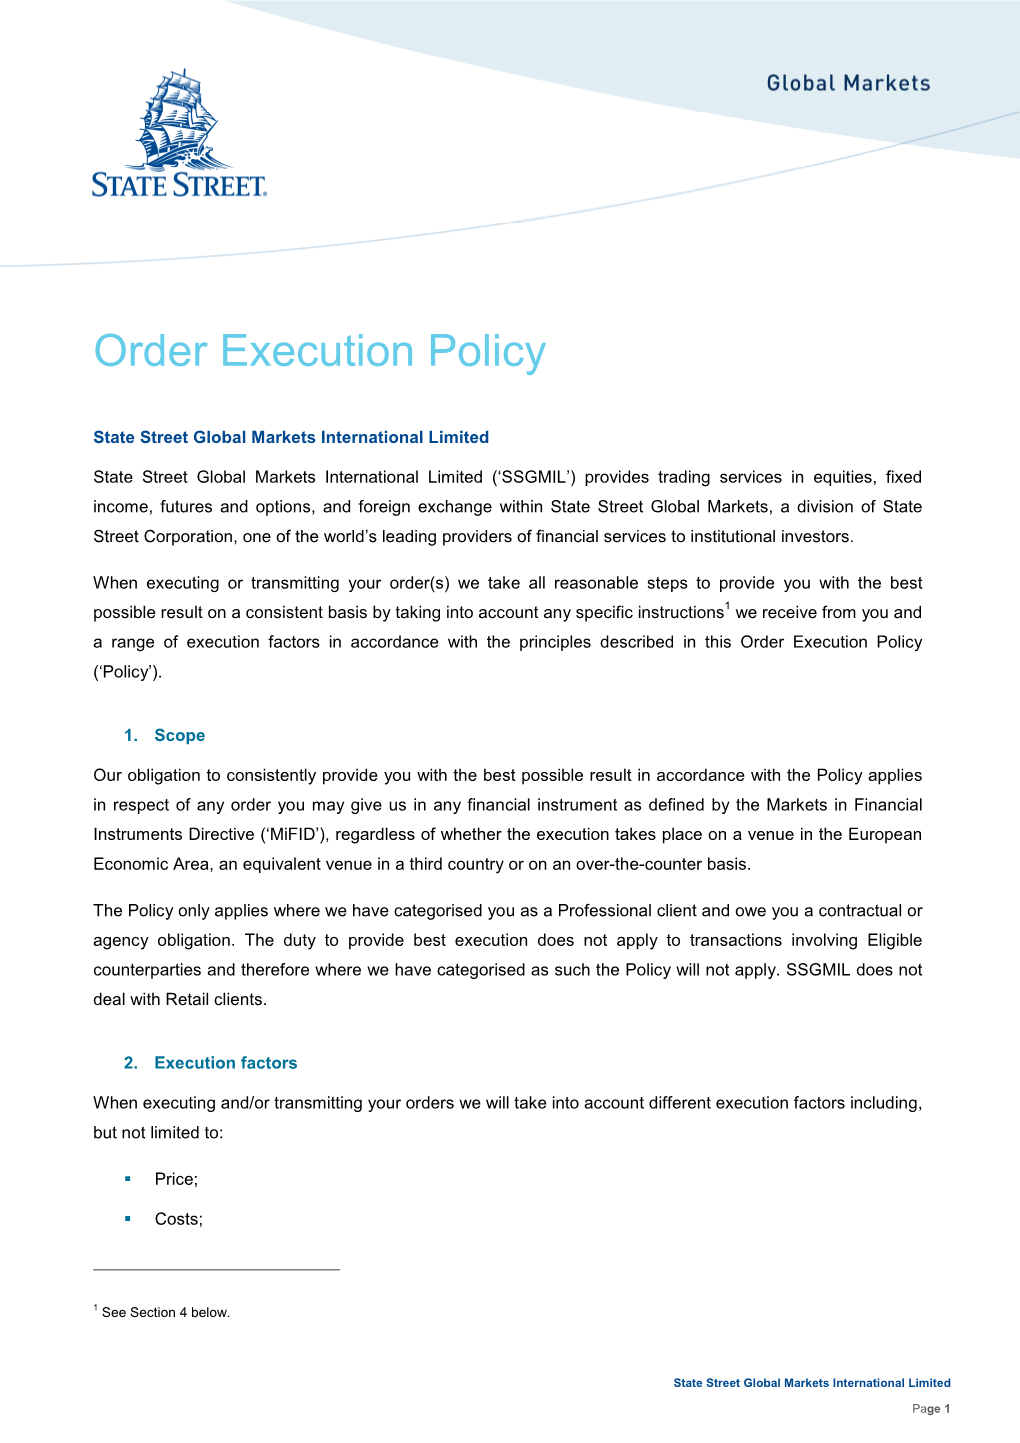 SSGMIL Order Execution Policy 2017 Jan